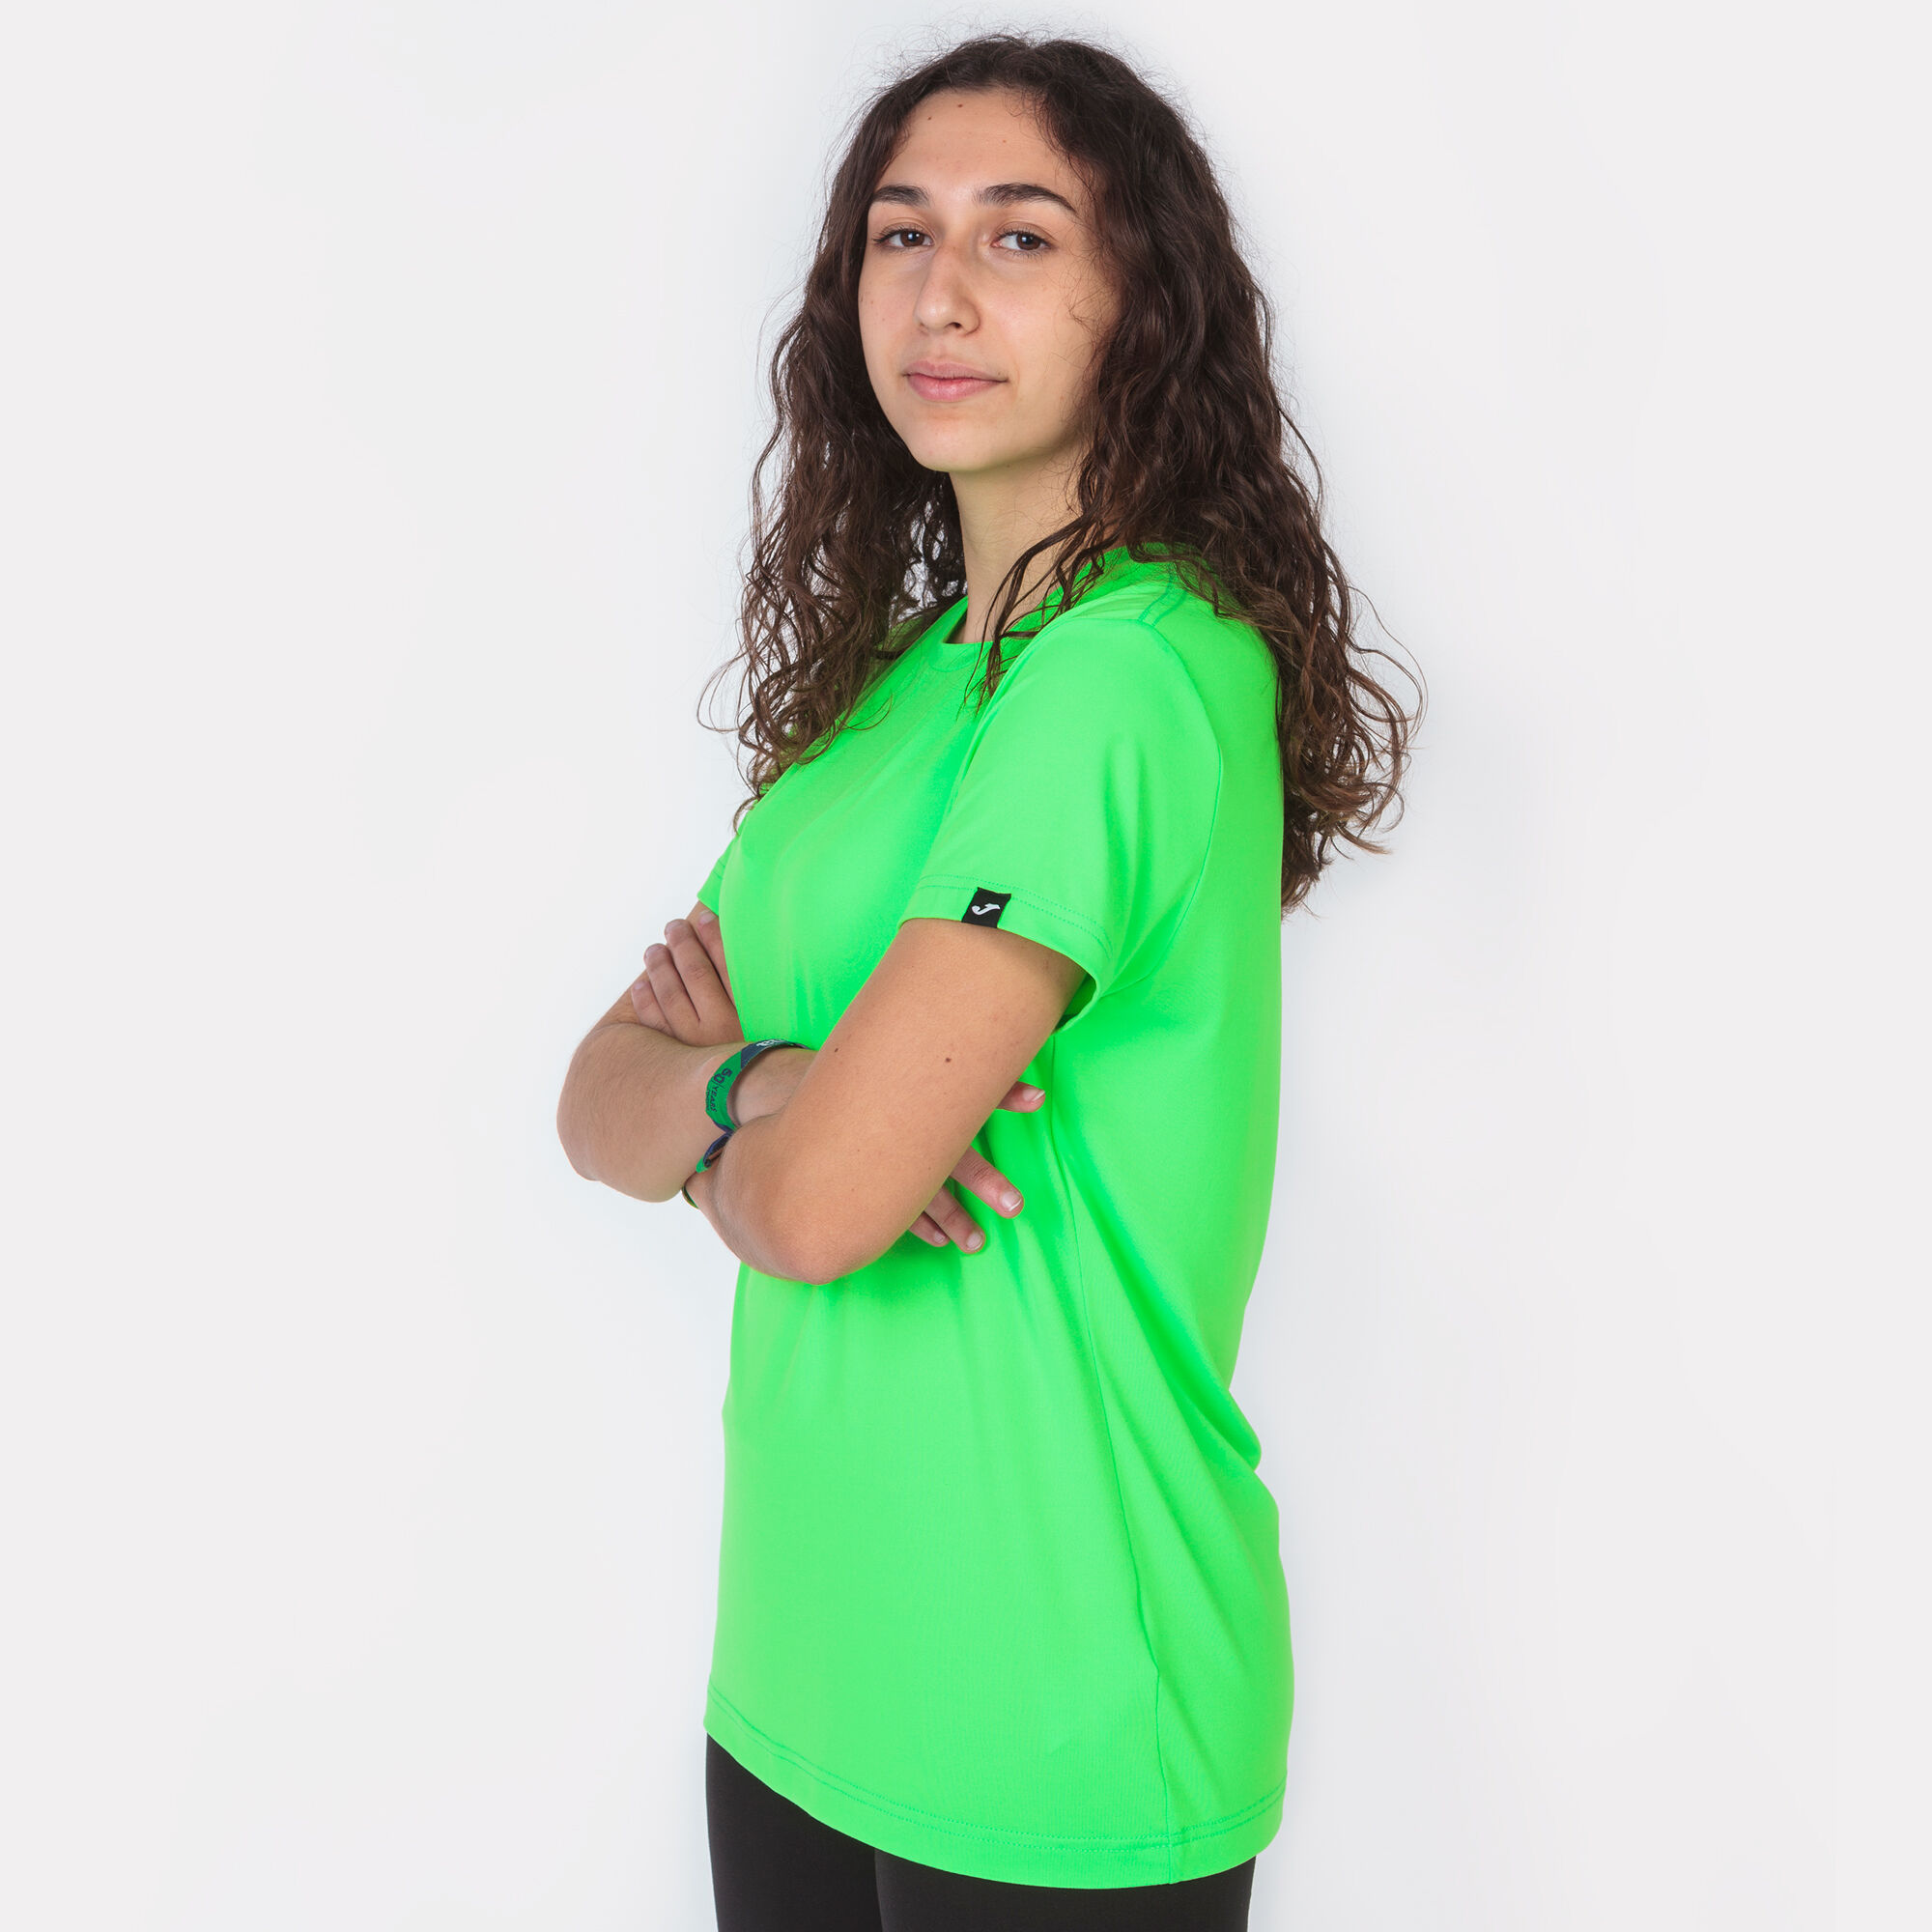 MAILLOT MANCHES COURTES FEMME TORNEO VERT FLUO